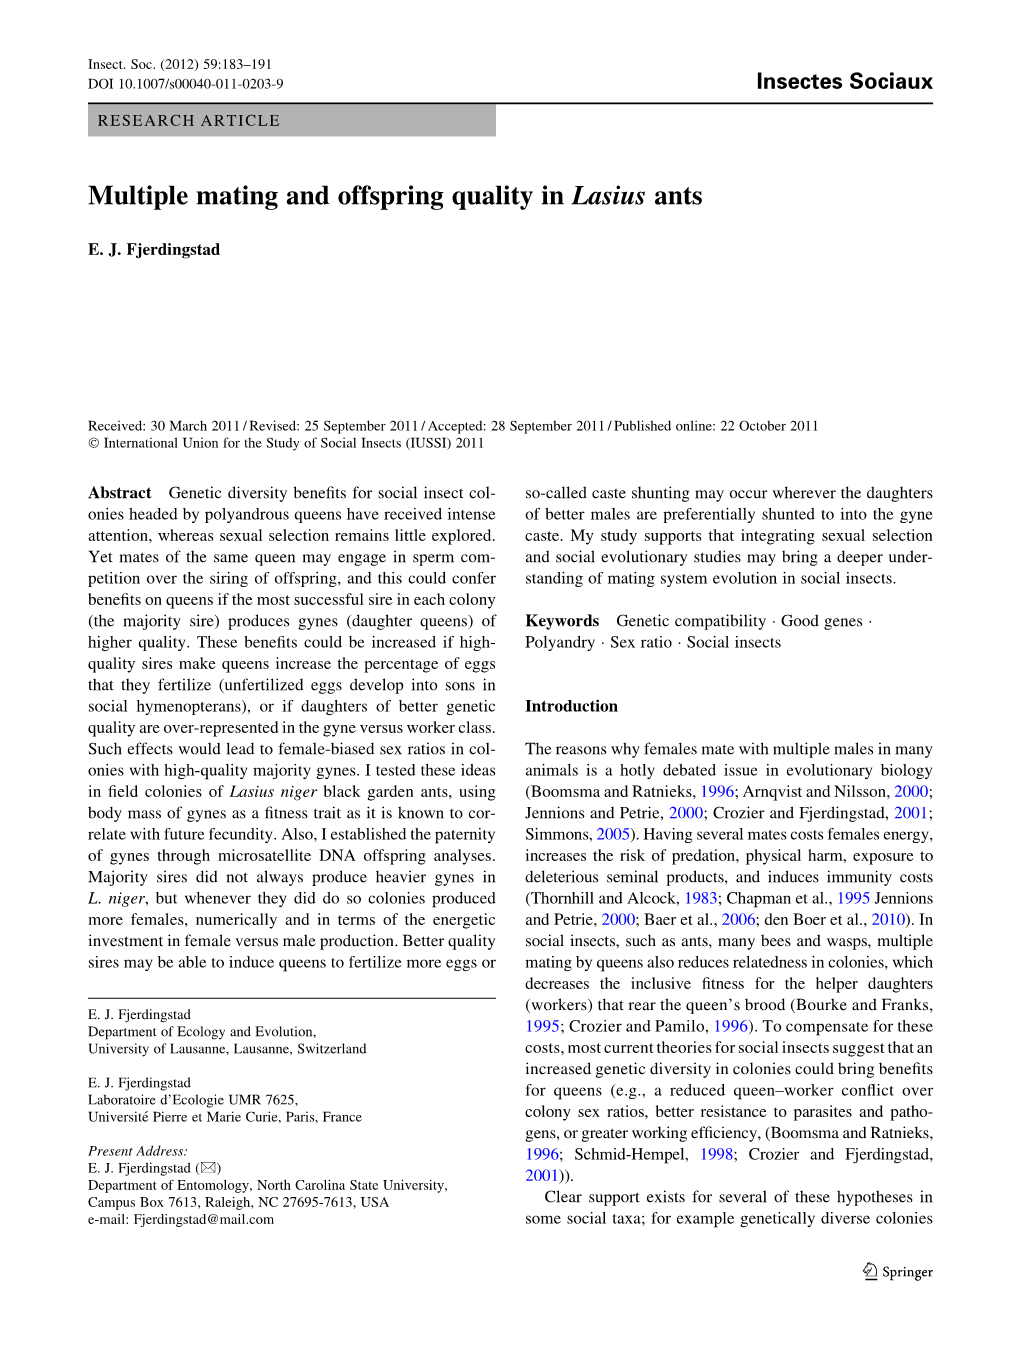 Multiple Mating and Offspring Quality in Lasius Ants